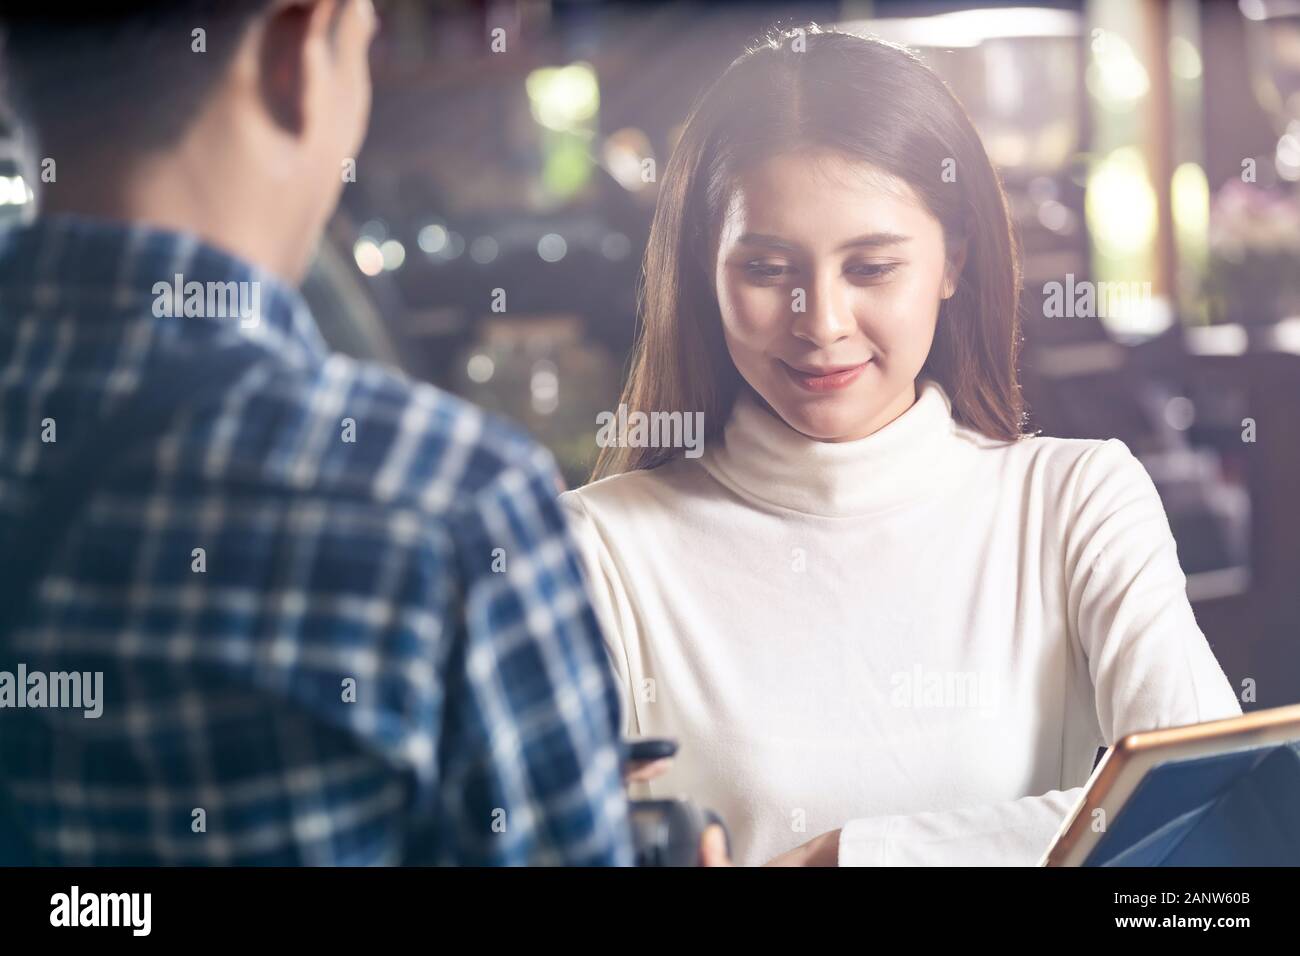 Asian woman customer using mobile phone scane QR code on credit card reader EDC machine to pay a waiter for coffee purchase at table in cafe. Stock Photo